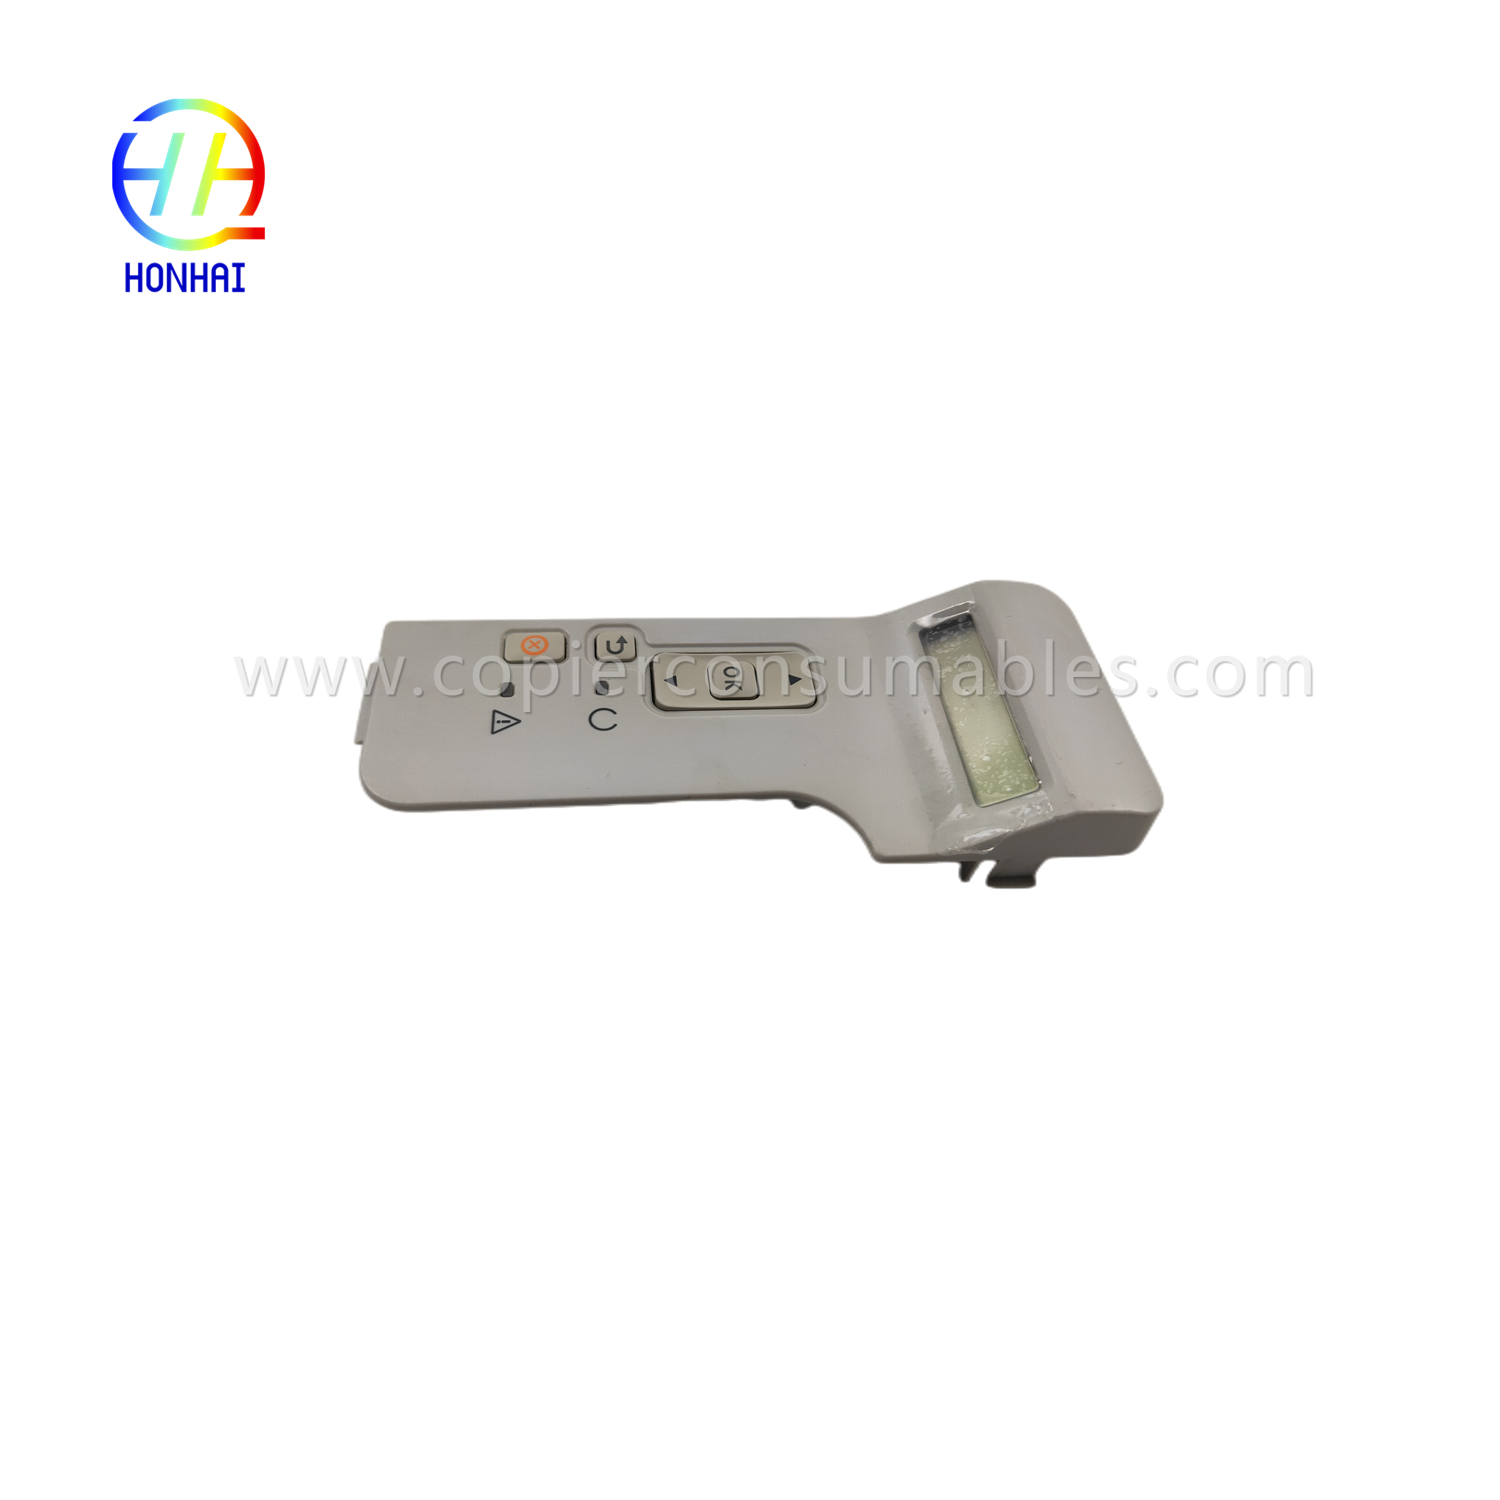 https://www.copierconsumables.com/control-panel-display-for-hp-rc2-6262-p2030-p2035-p2055dn-product/